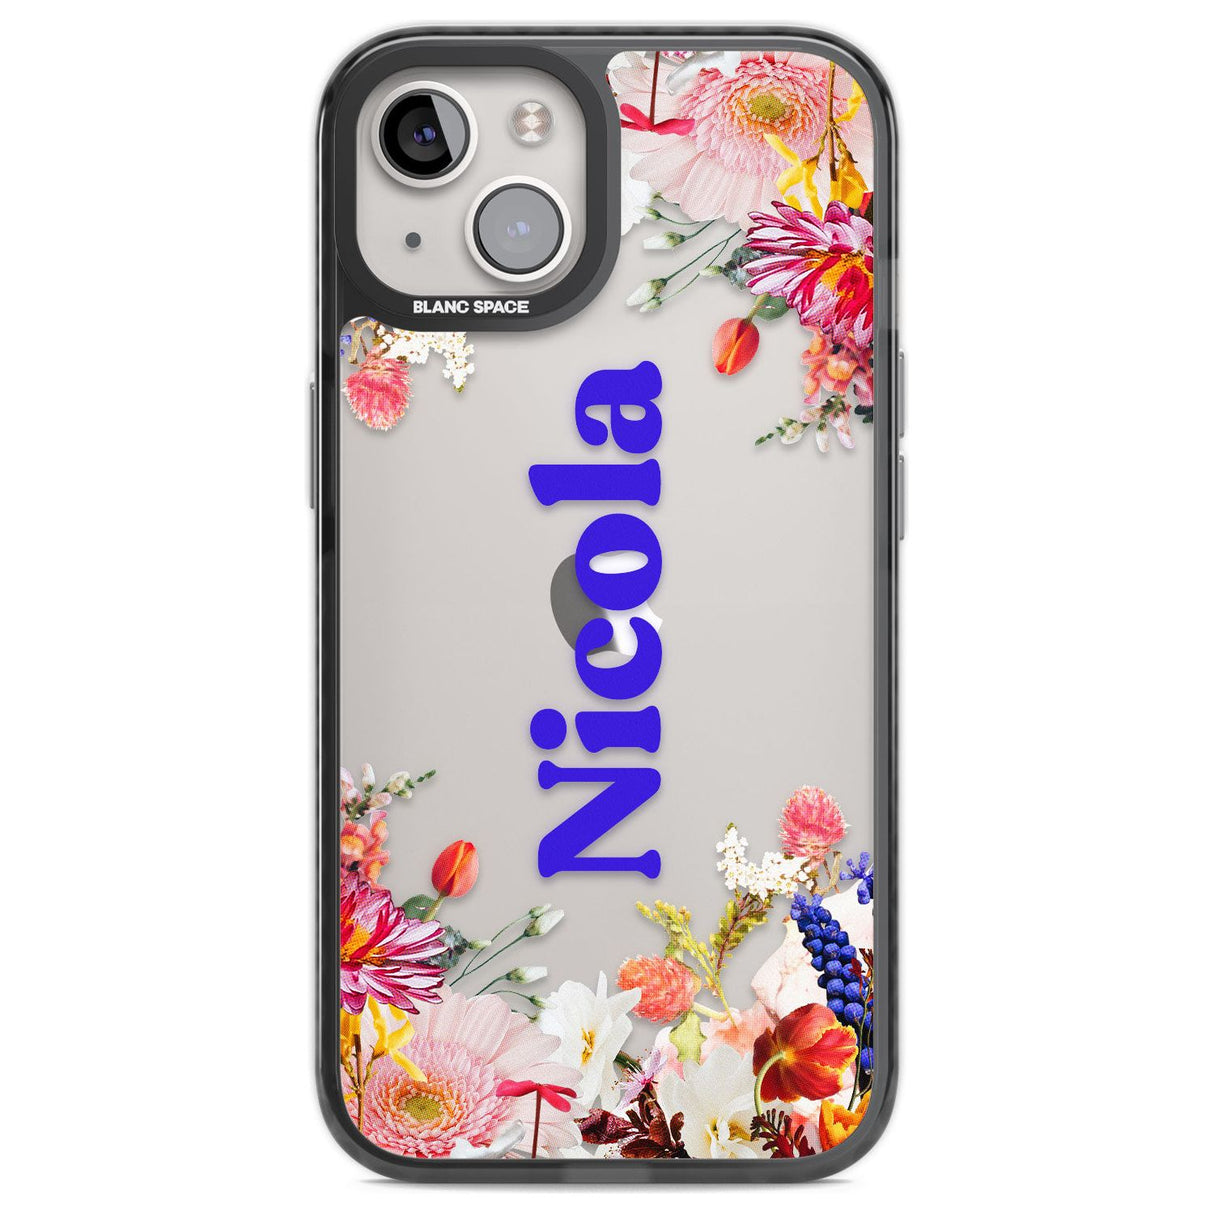 Personalised Text with Floral Borders Custom Phone Case iPhone 12 / Black Impact Case,iPhone 13 / Black Impact Case,iPhone 12 Pro / Black Impact Case,iPhone 14 / Black Impact Case,iPhone 15 Plus / Black Impact Case,iPhone 15 / Black Impact Case Blanc Space